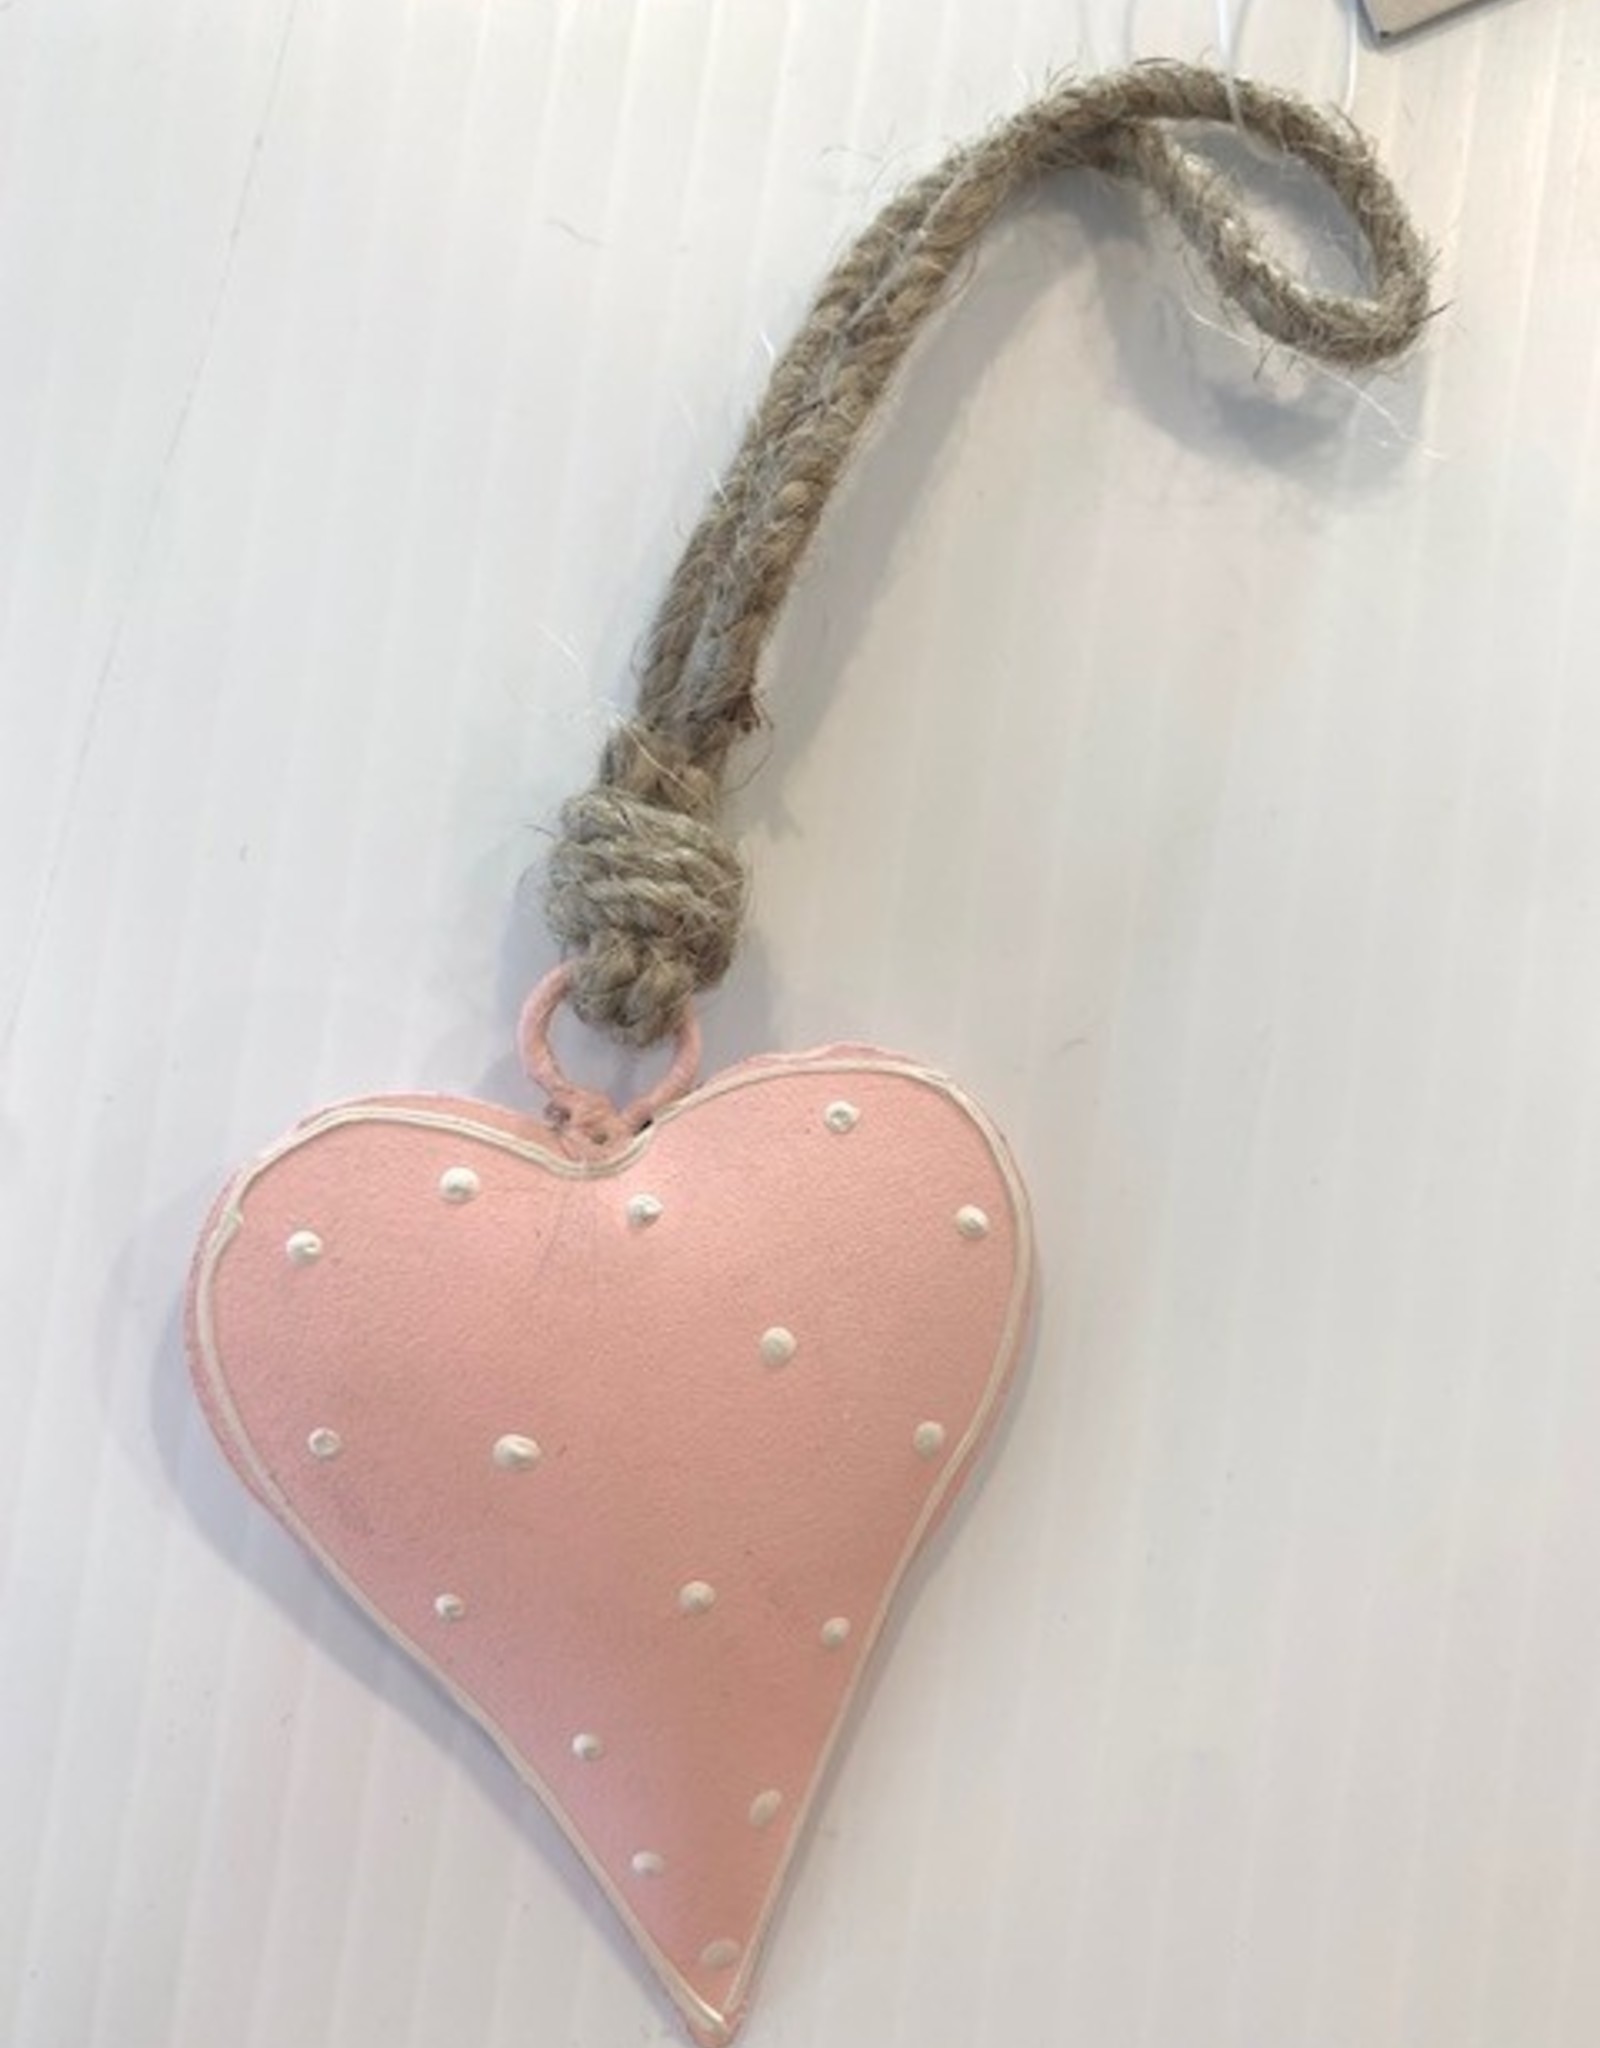 Jafsons Int. Painted Iron Hearts 2.75"